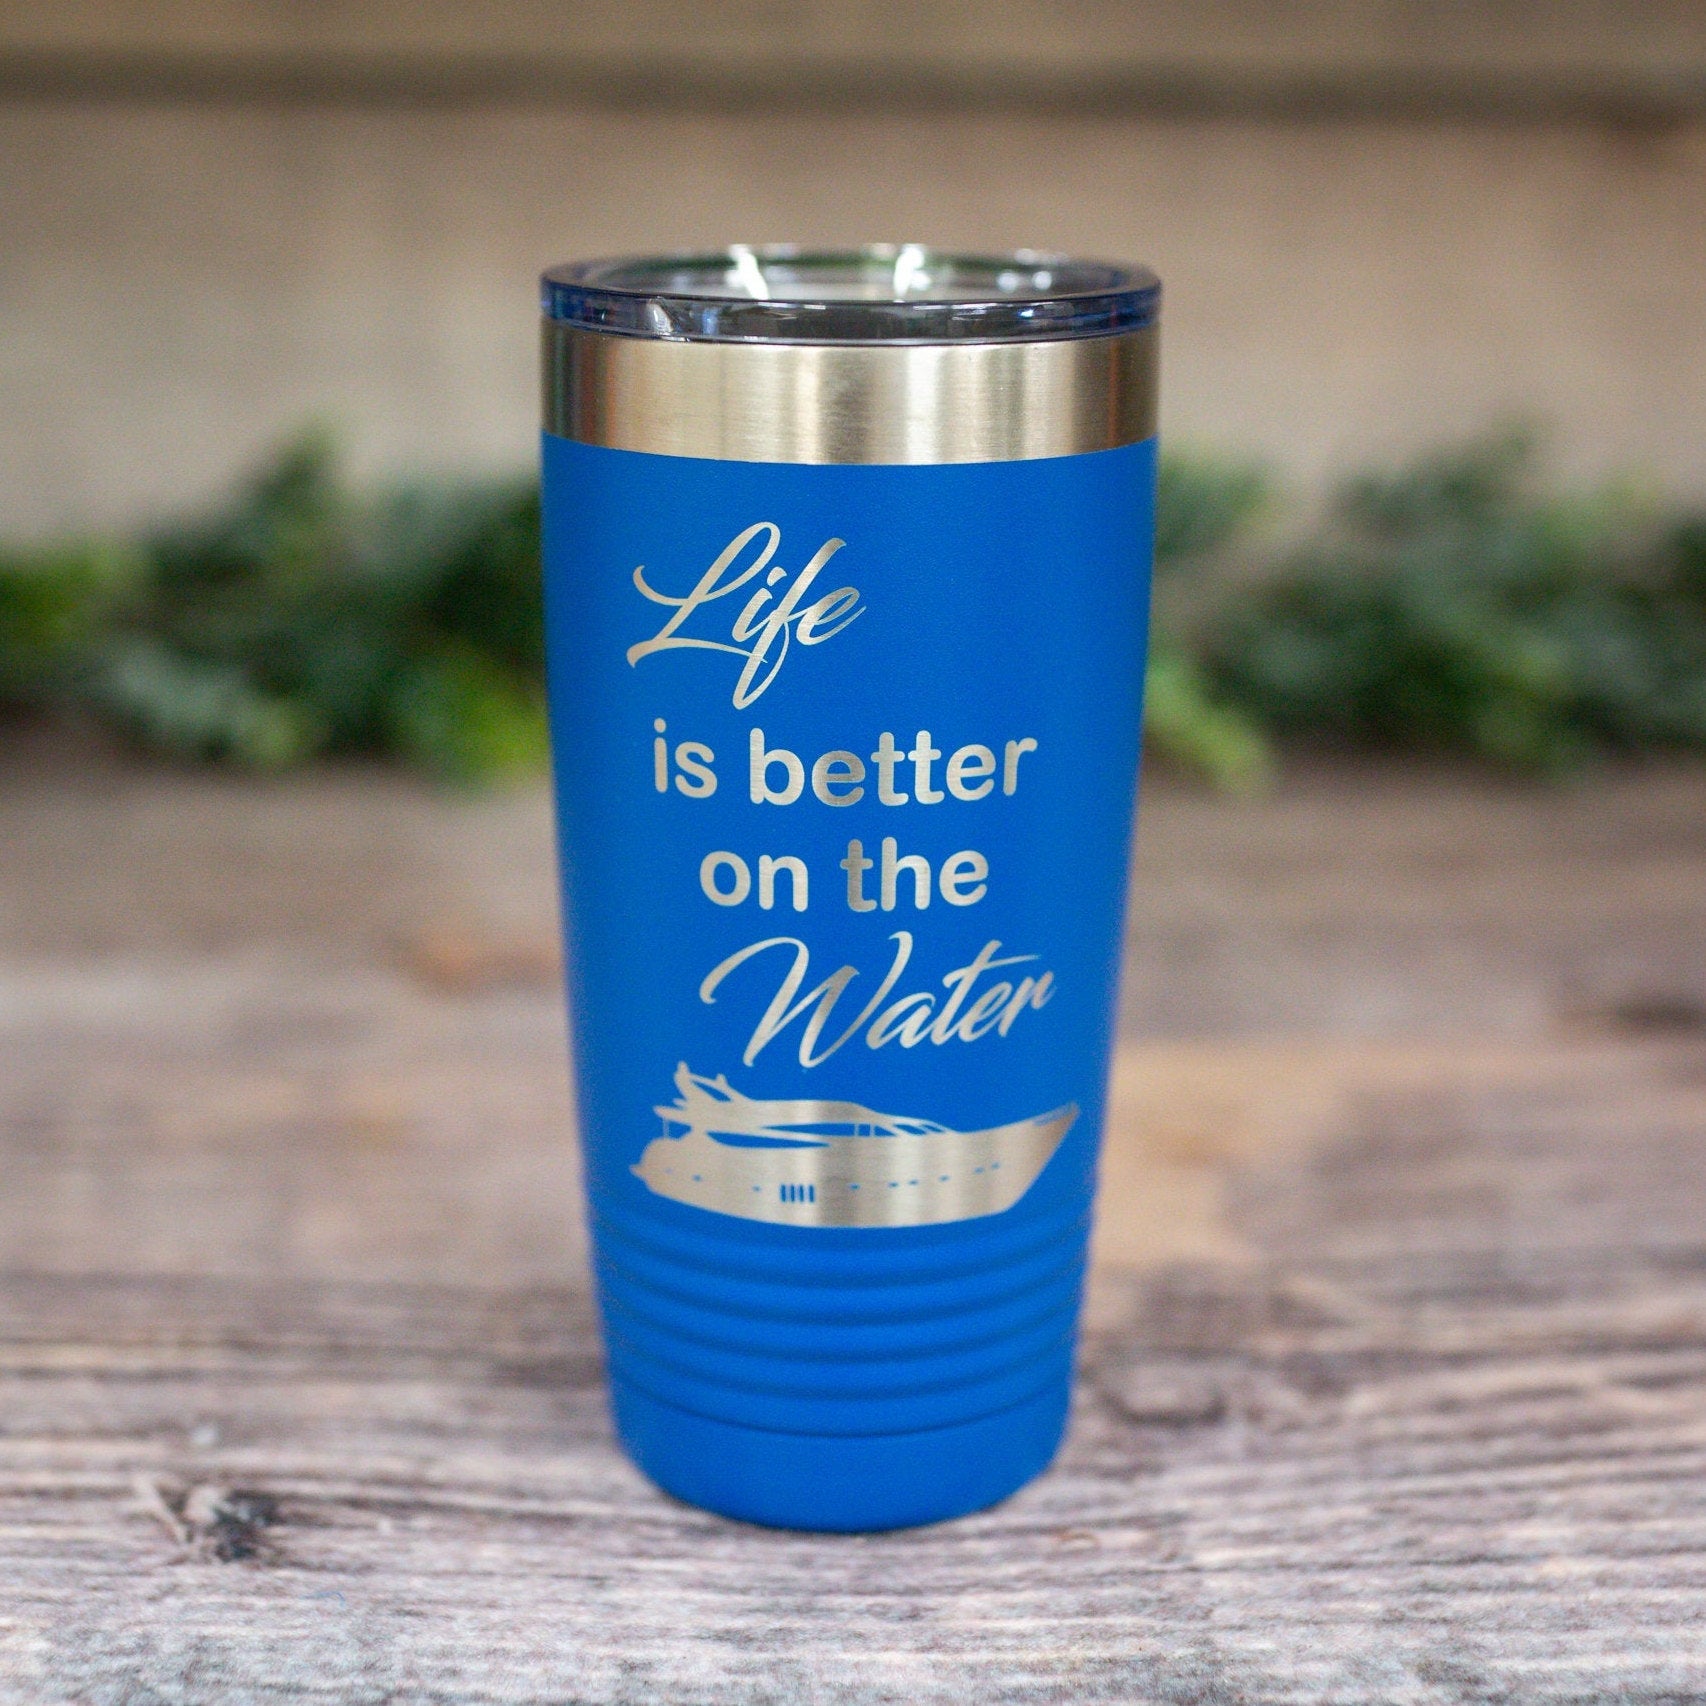 https://3cetching.com/wp-content/uploads/2021/07/life-is-better-on-the-water-boat-engraved-stainless-steel-tumbler-boat-drinking-mug-yacht-tumbler-60f72eee.jpg